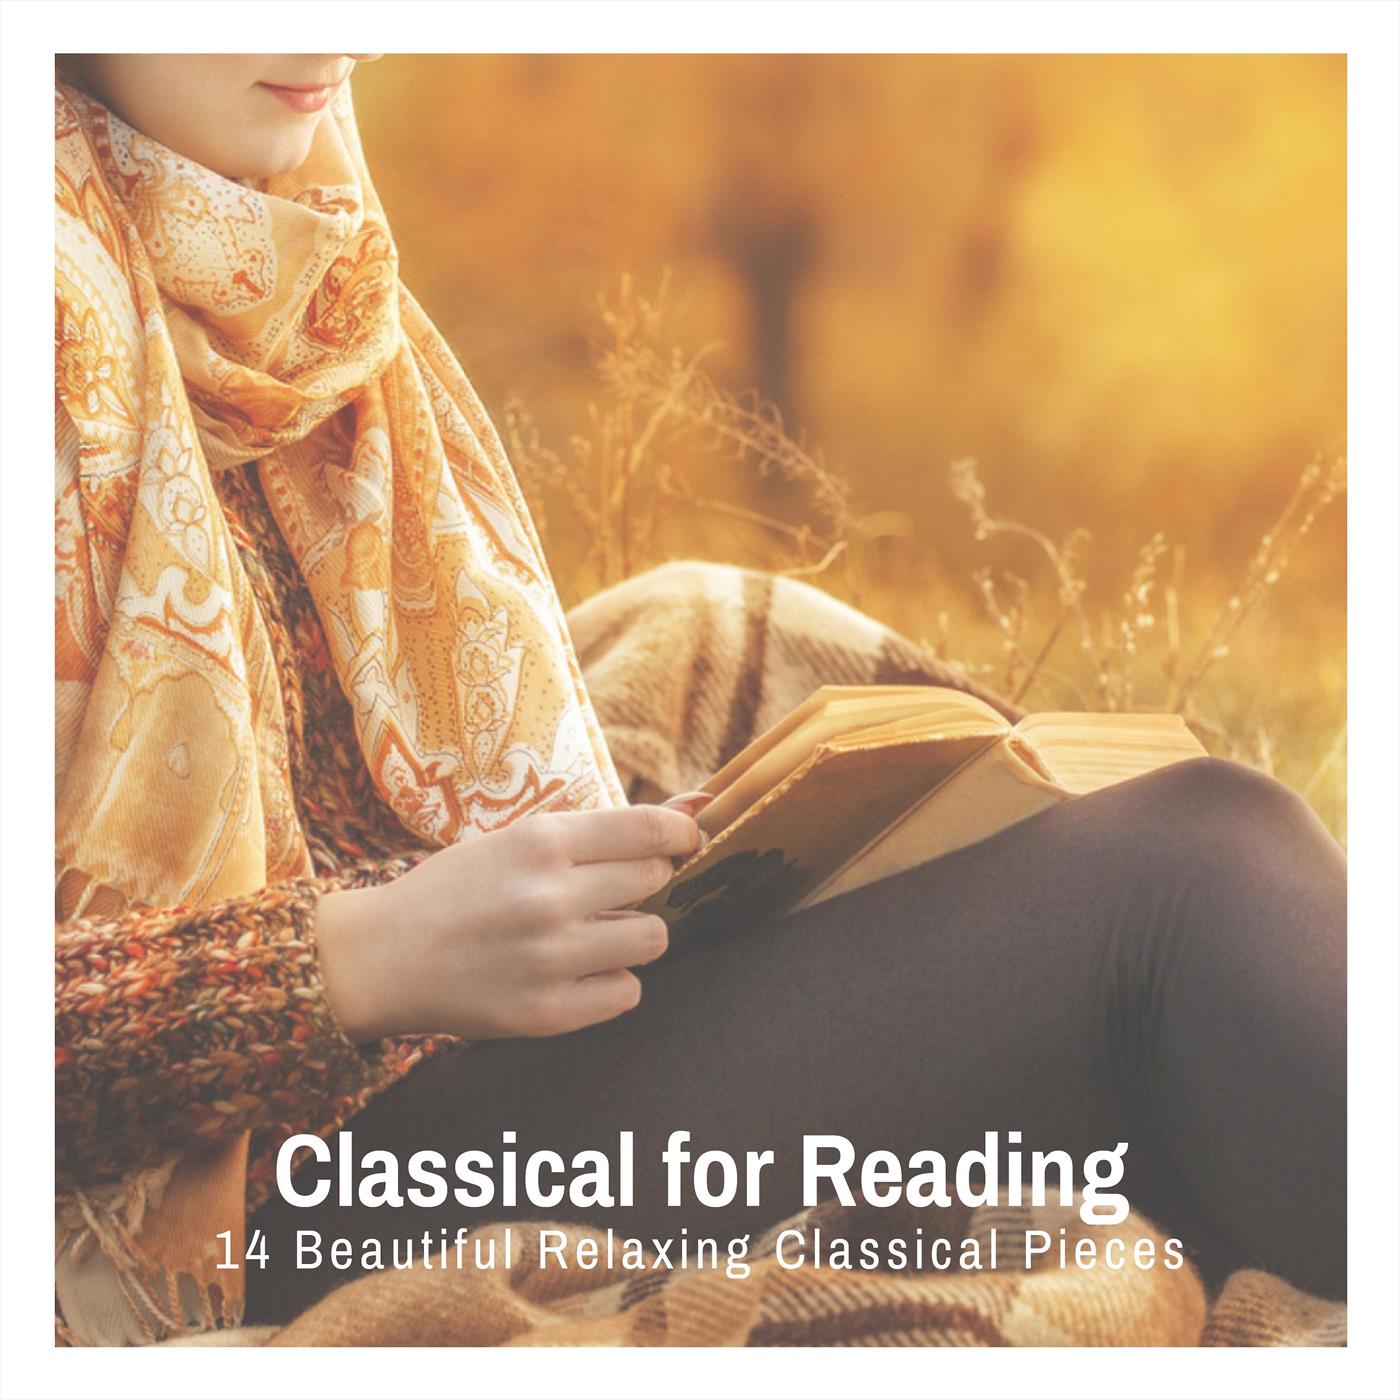 Classical for Reading: 14 Beautiful Relaxing Classical Pieces